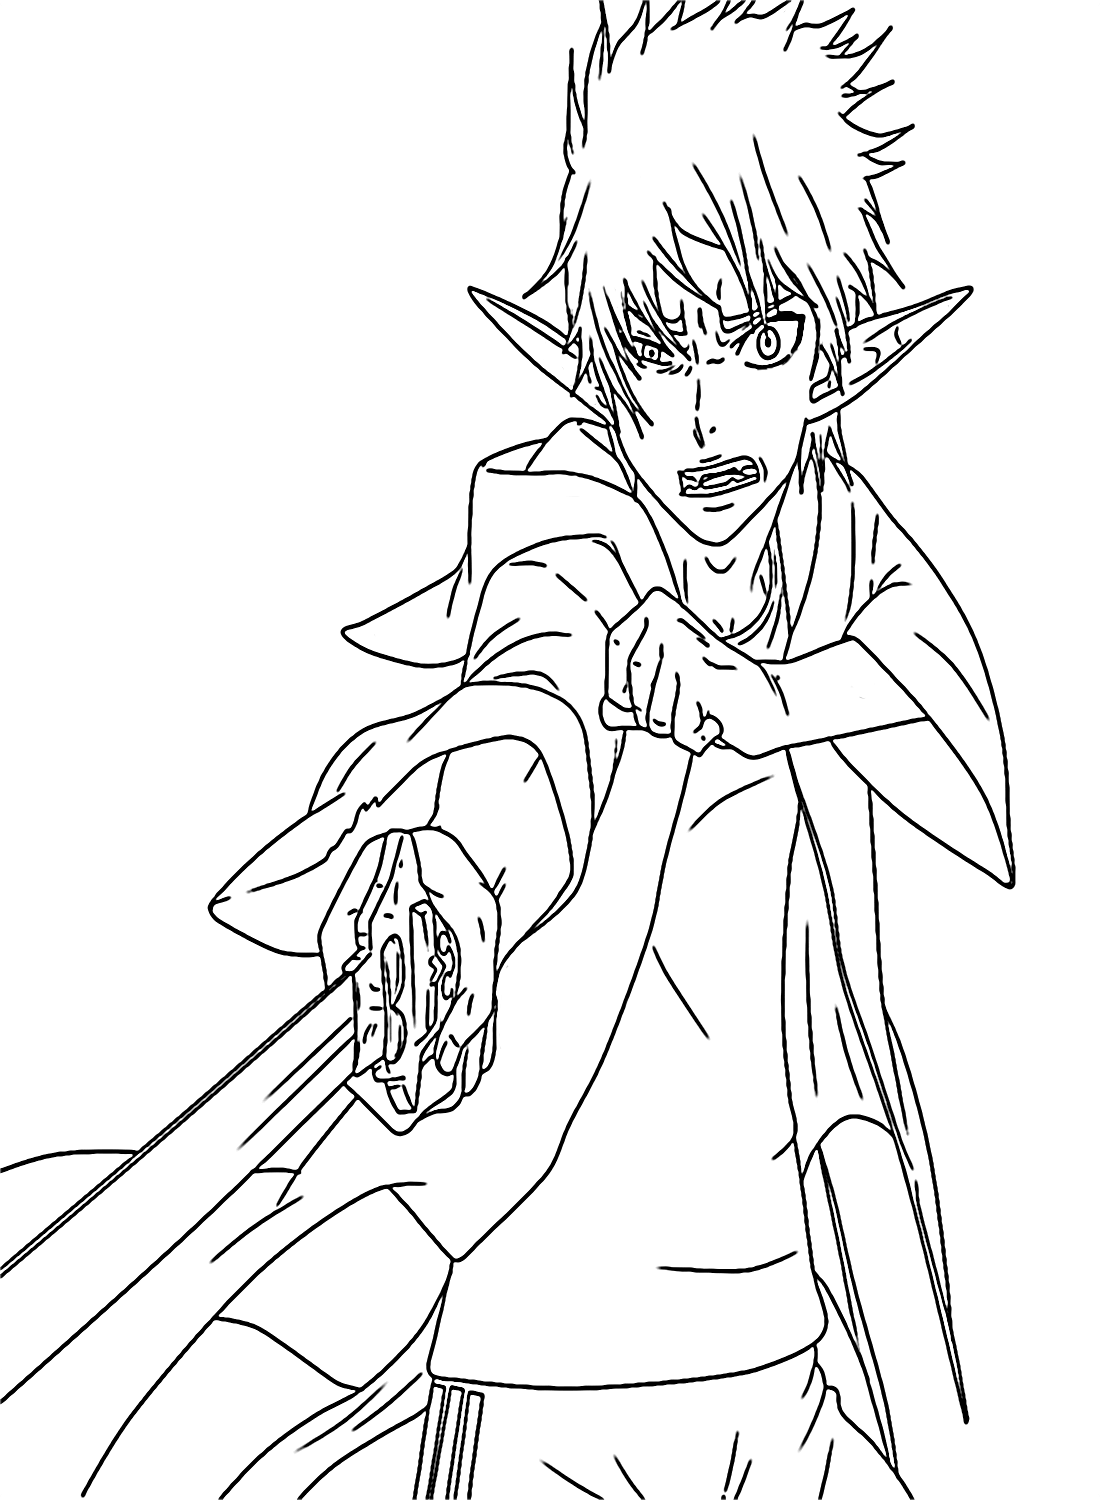 Rin Okumura to Color - Free Printable Coloring Pages